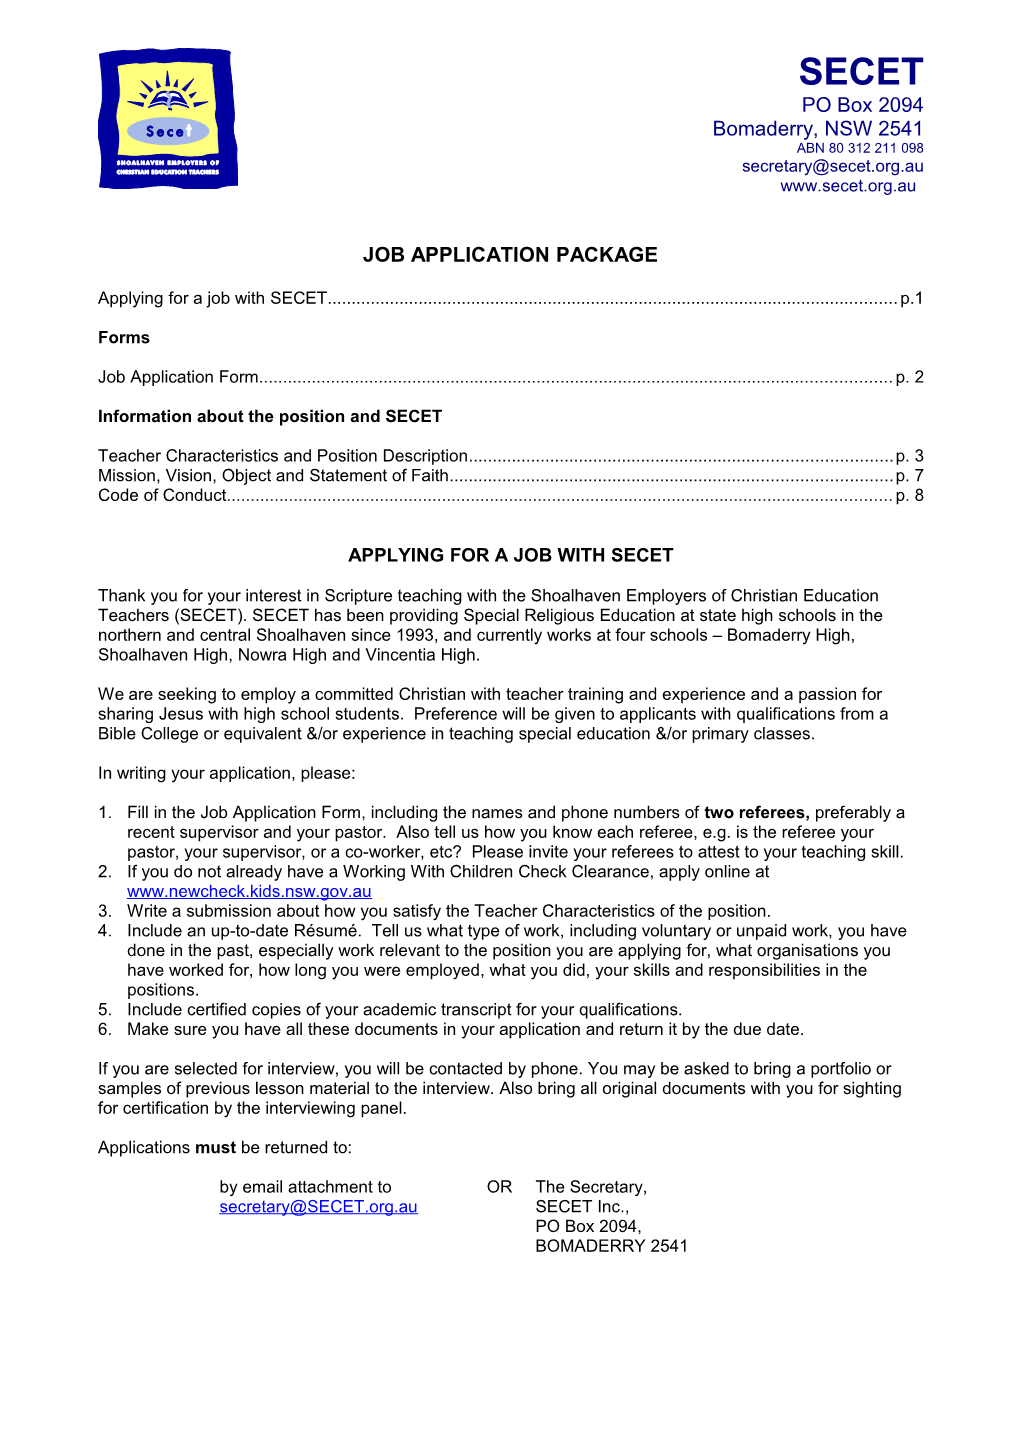 Job Application Package